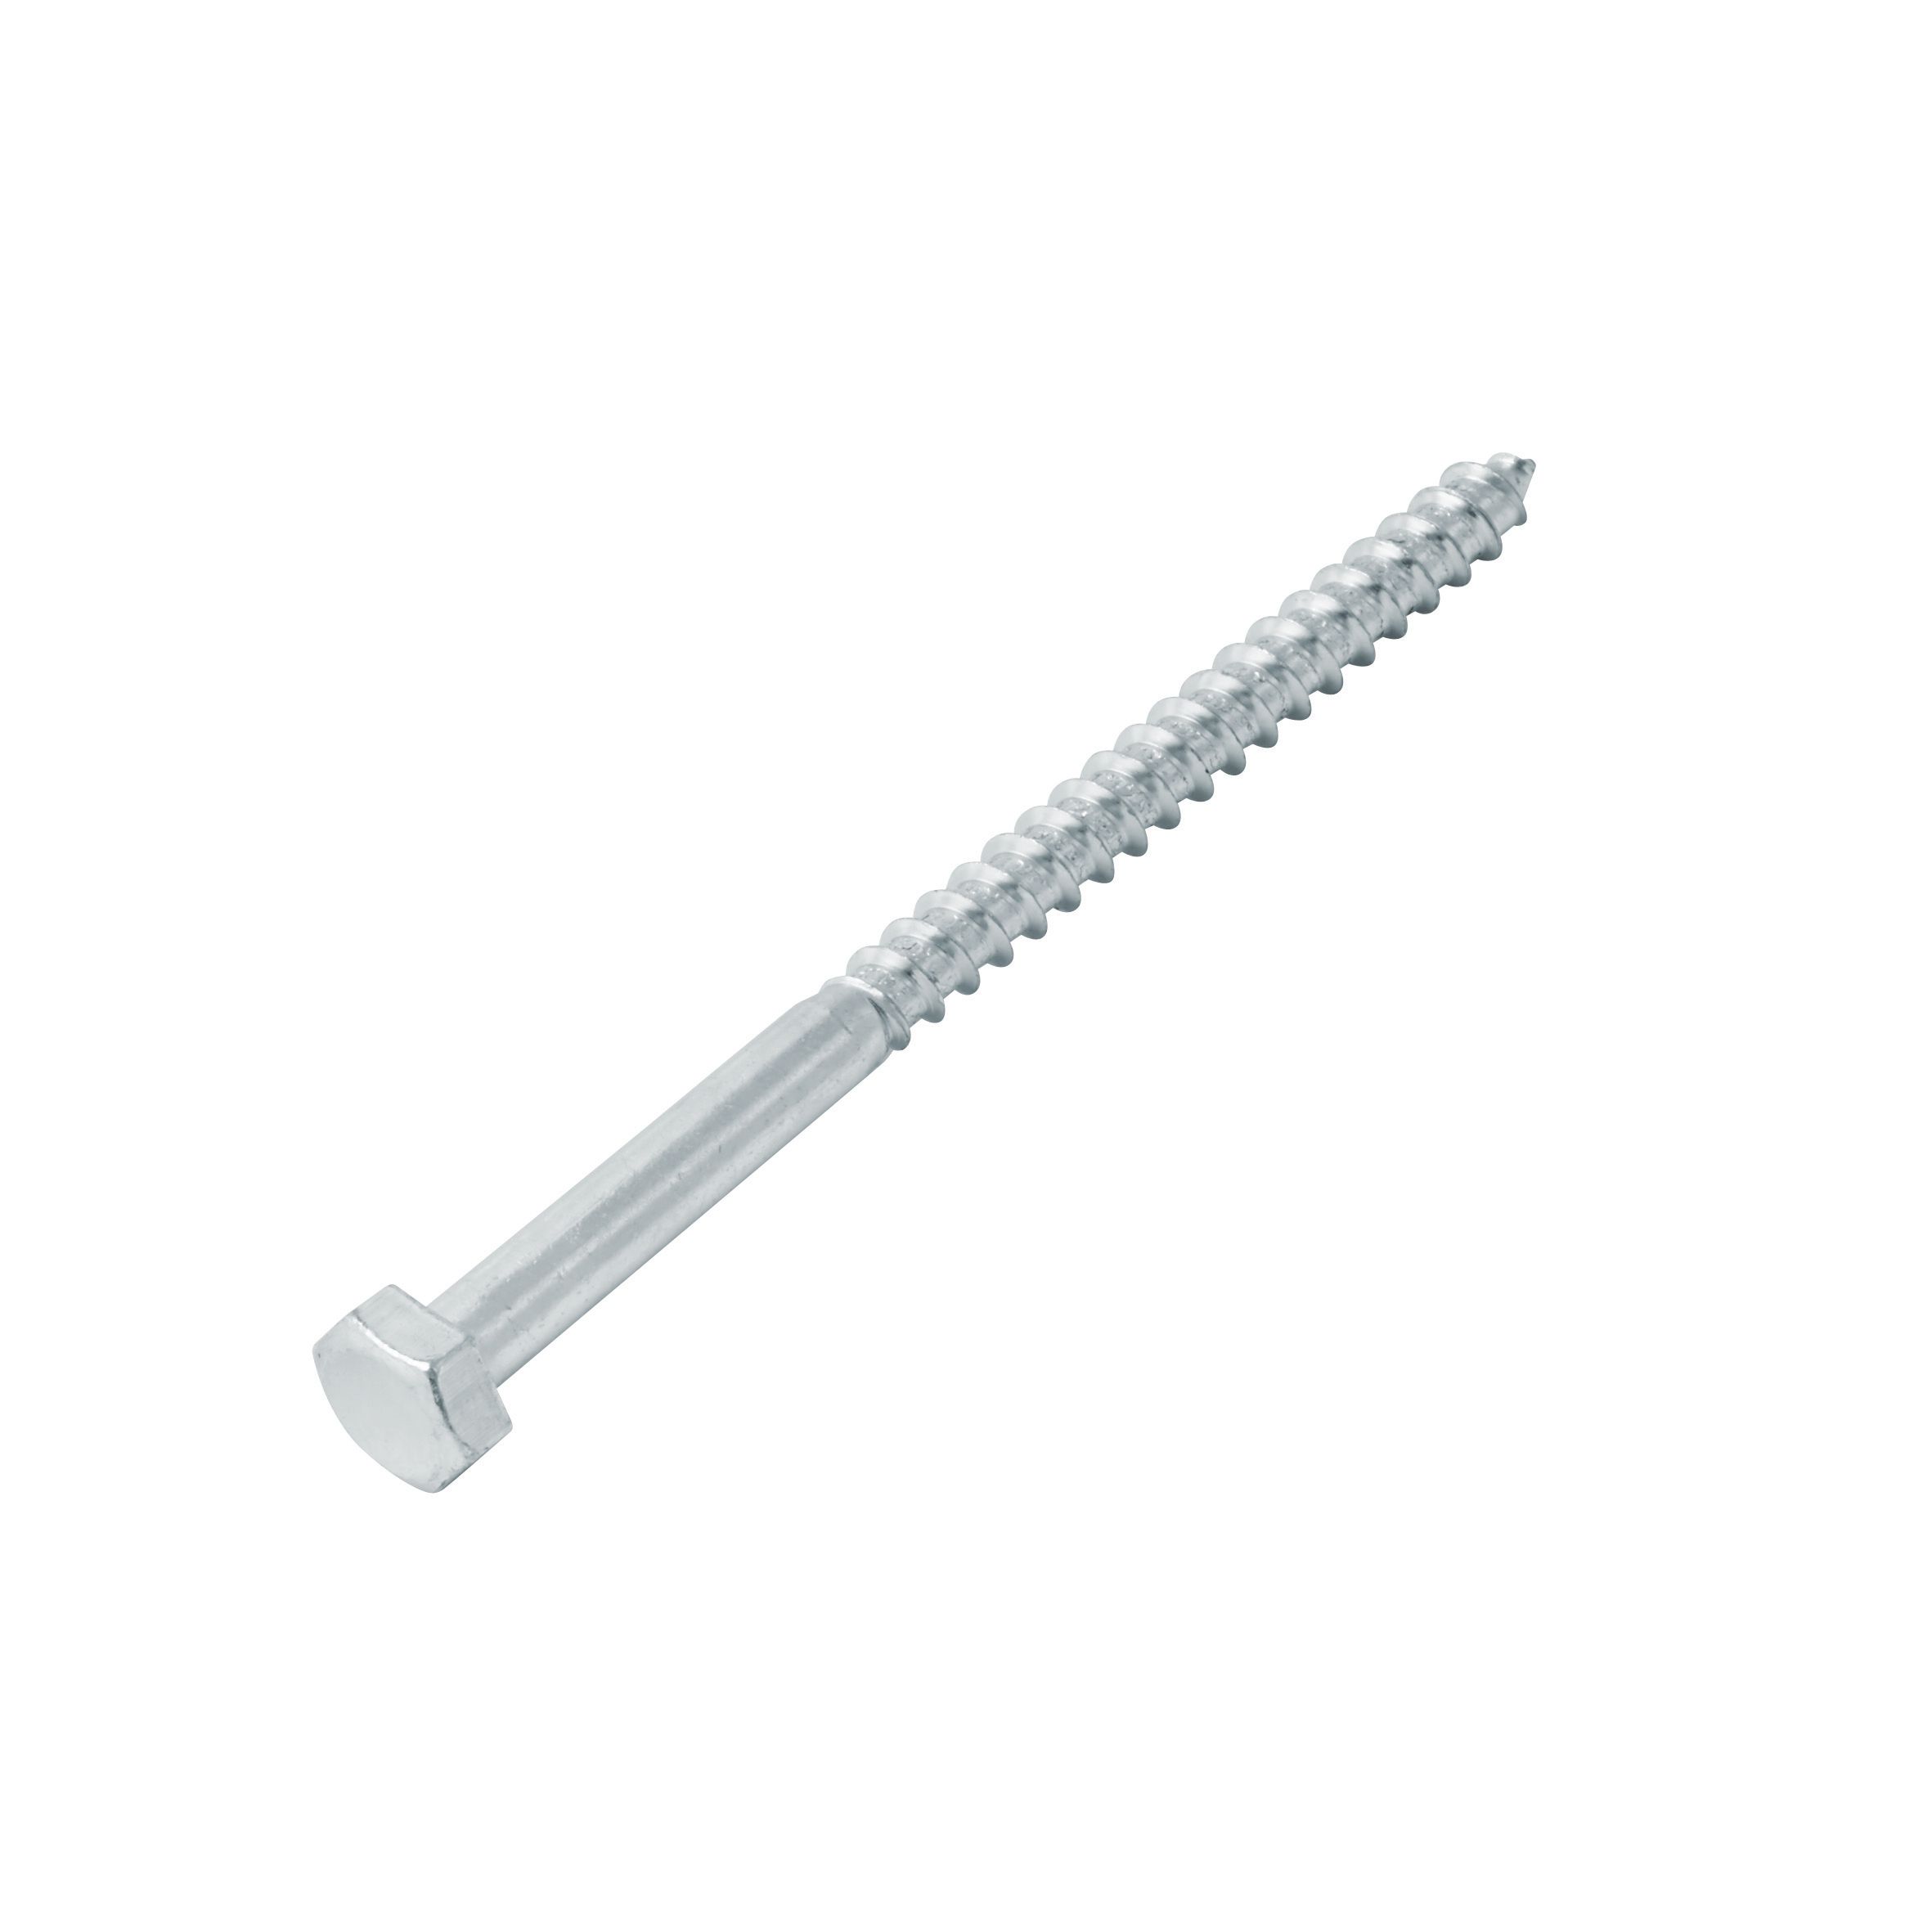 Image of Wickes Coach Screws - M6 x 65mm Pack of 12